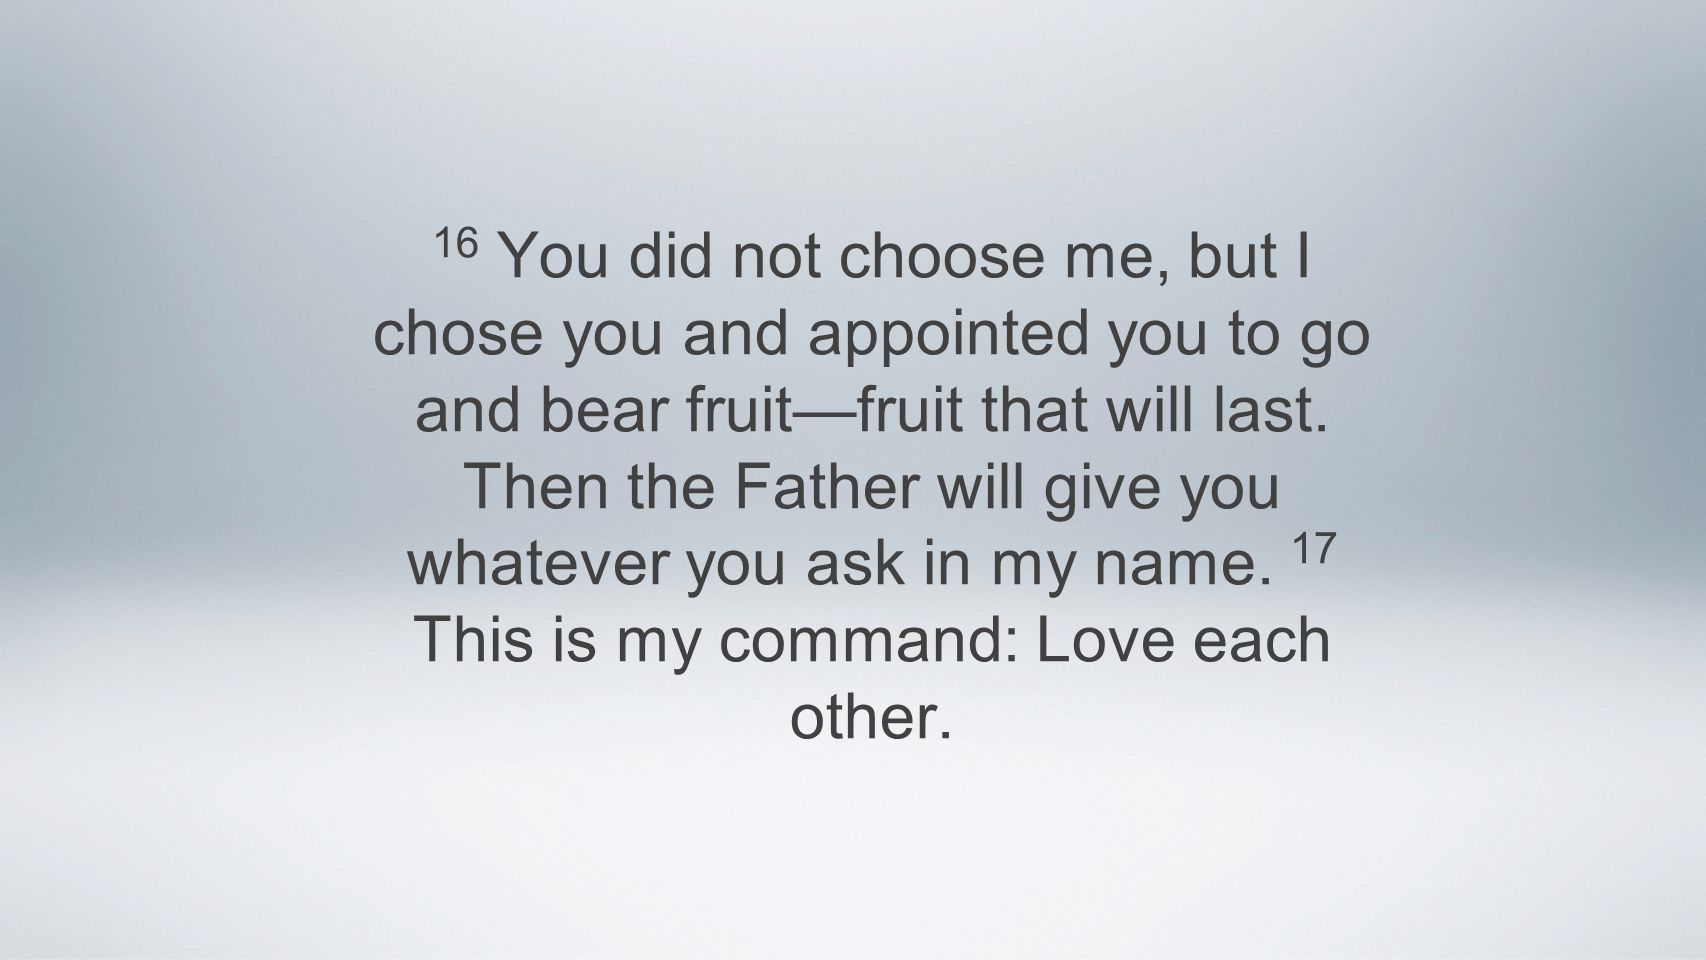 16 You did not choose me, but I chose you and appointed you to go and bear fruit—fruit that will last.